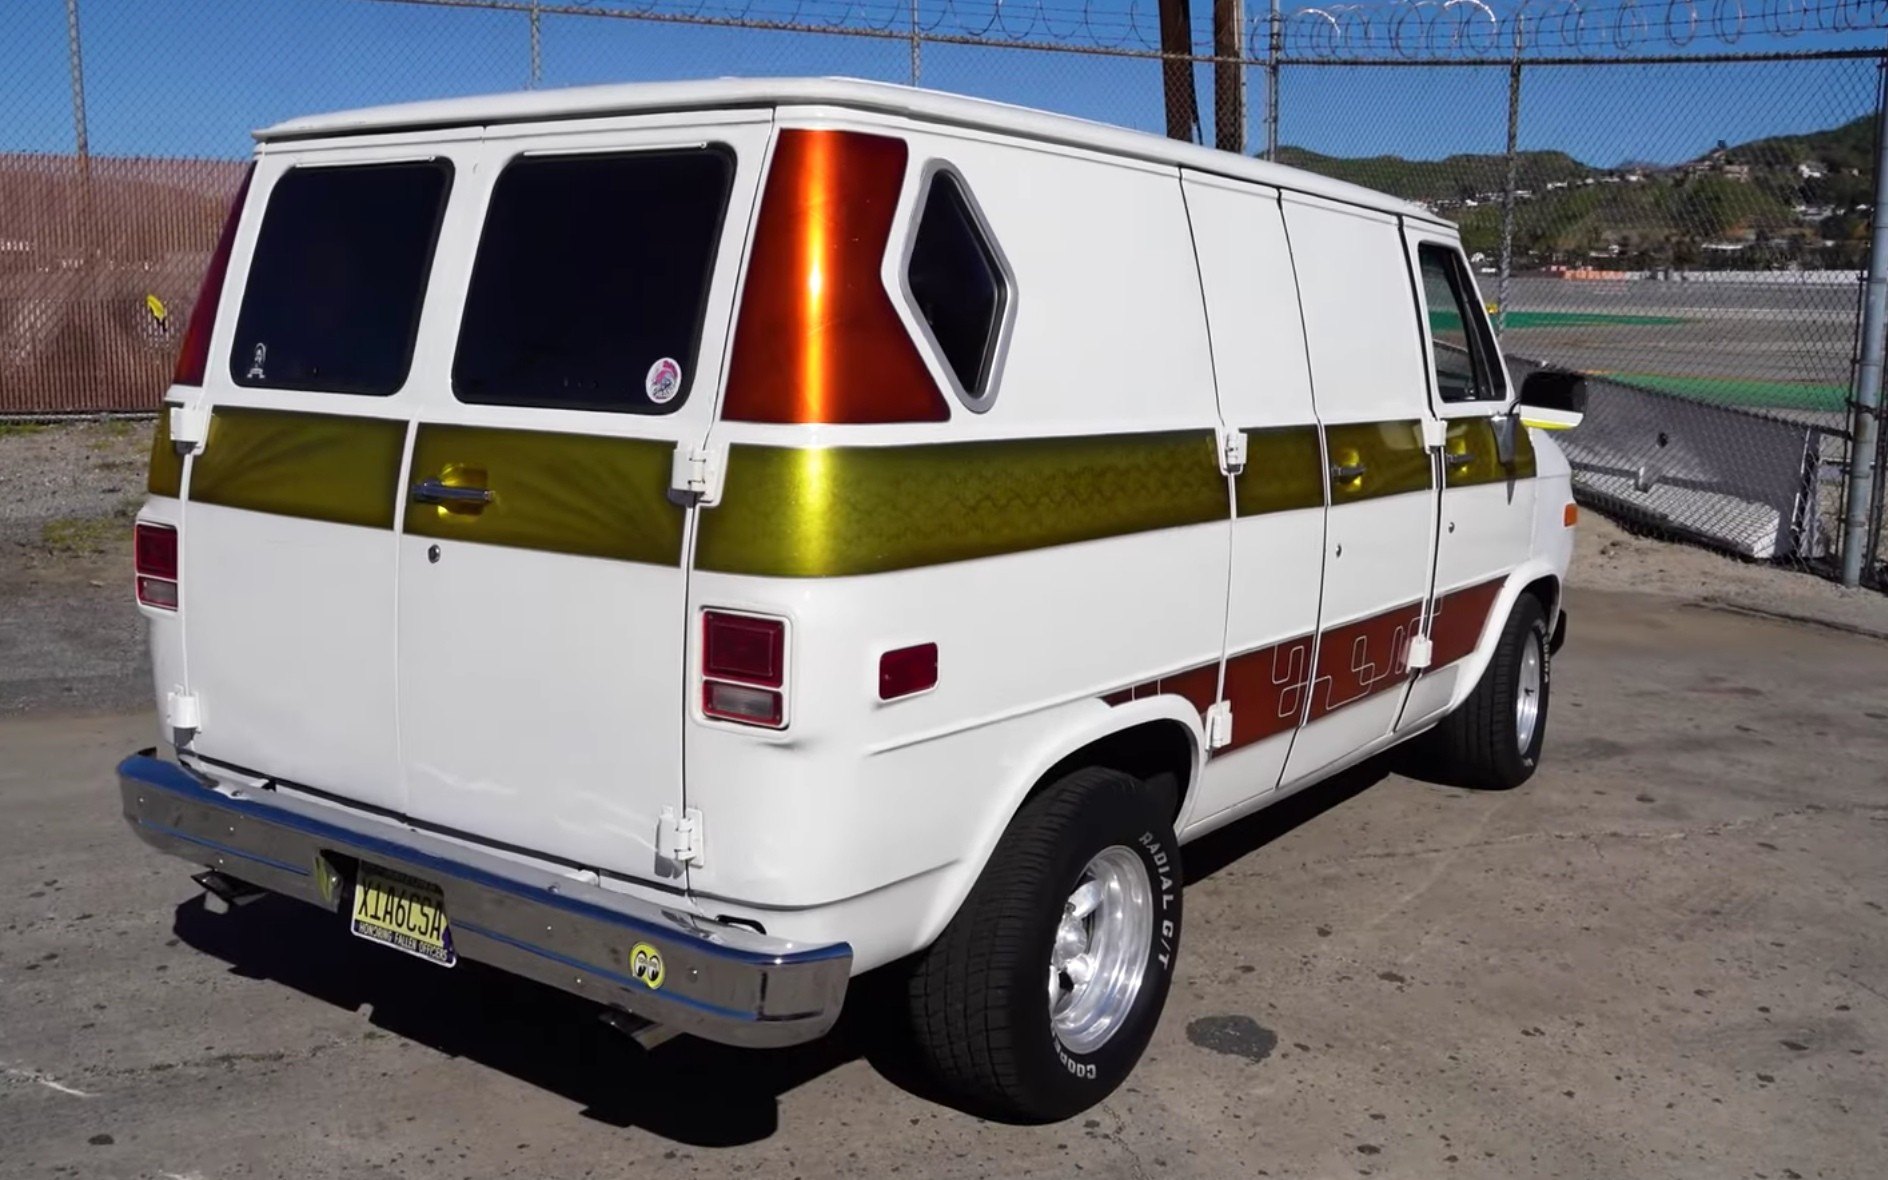 this-lsx-powered-90-chevy-g10-is-a-groovy-70s-party-van-reincarnate-with-an-attitude_7.jpg